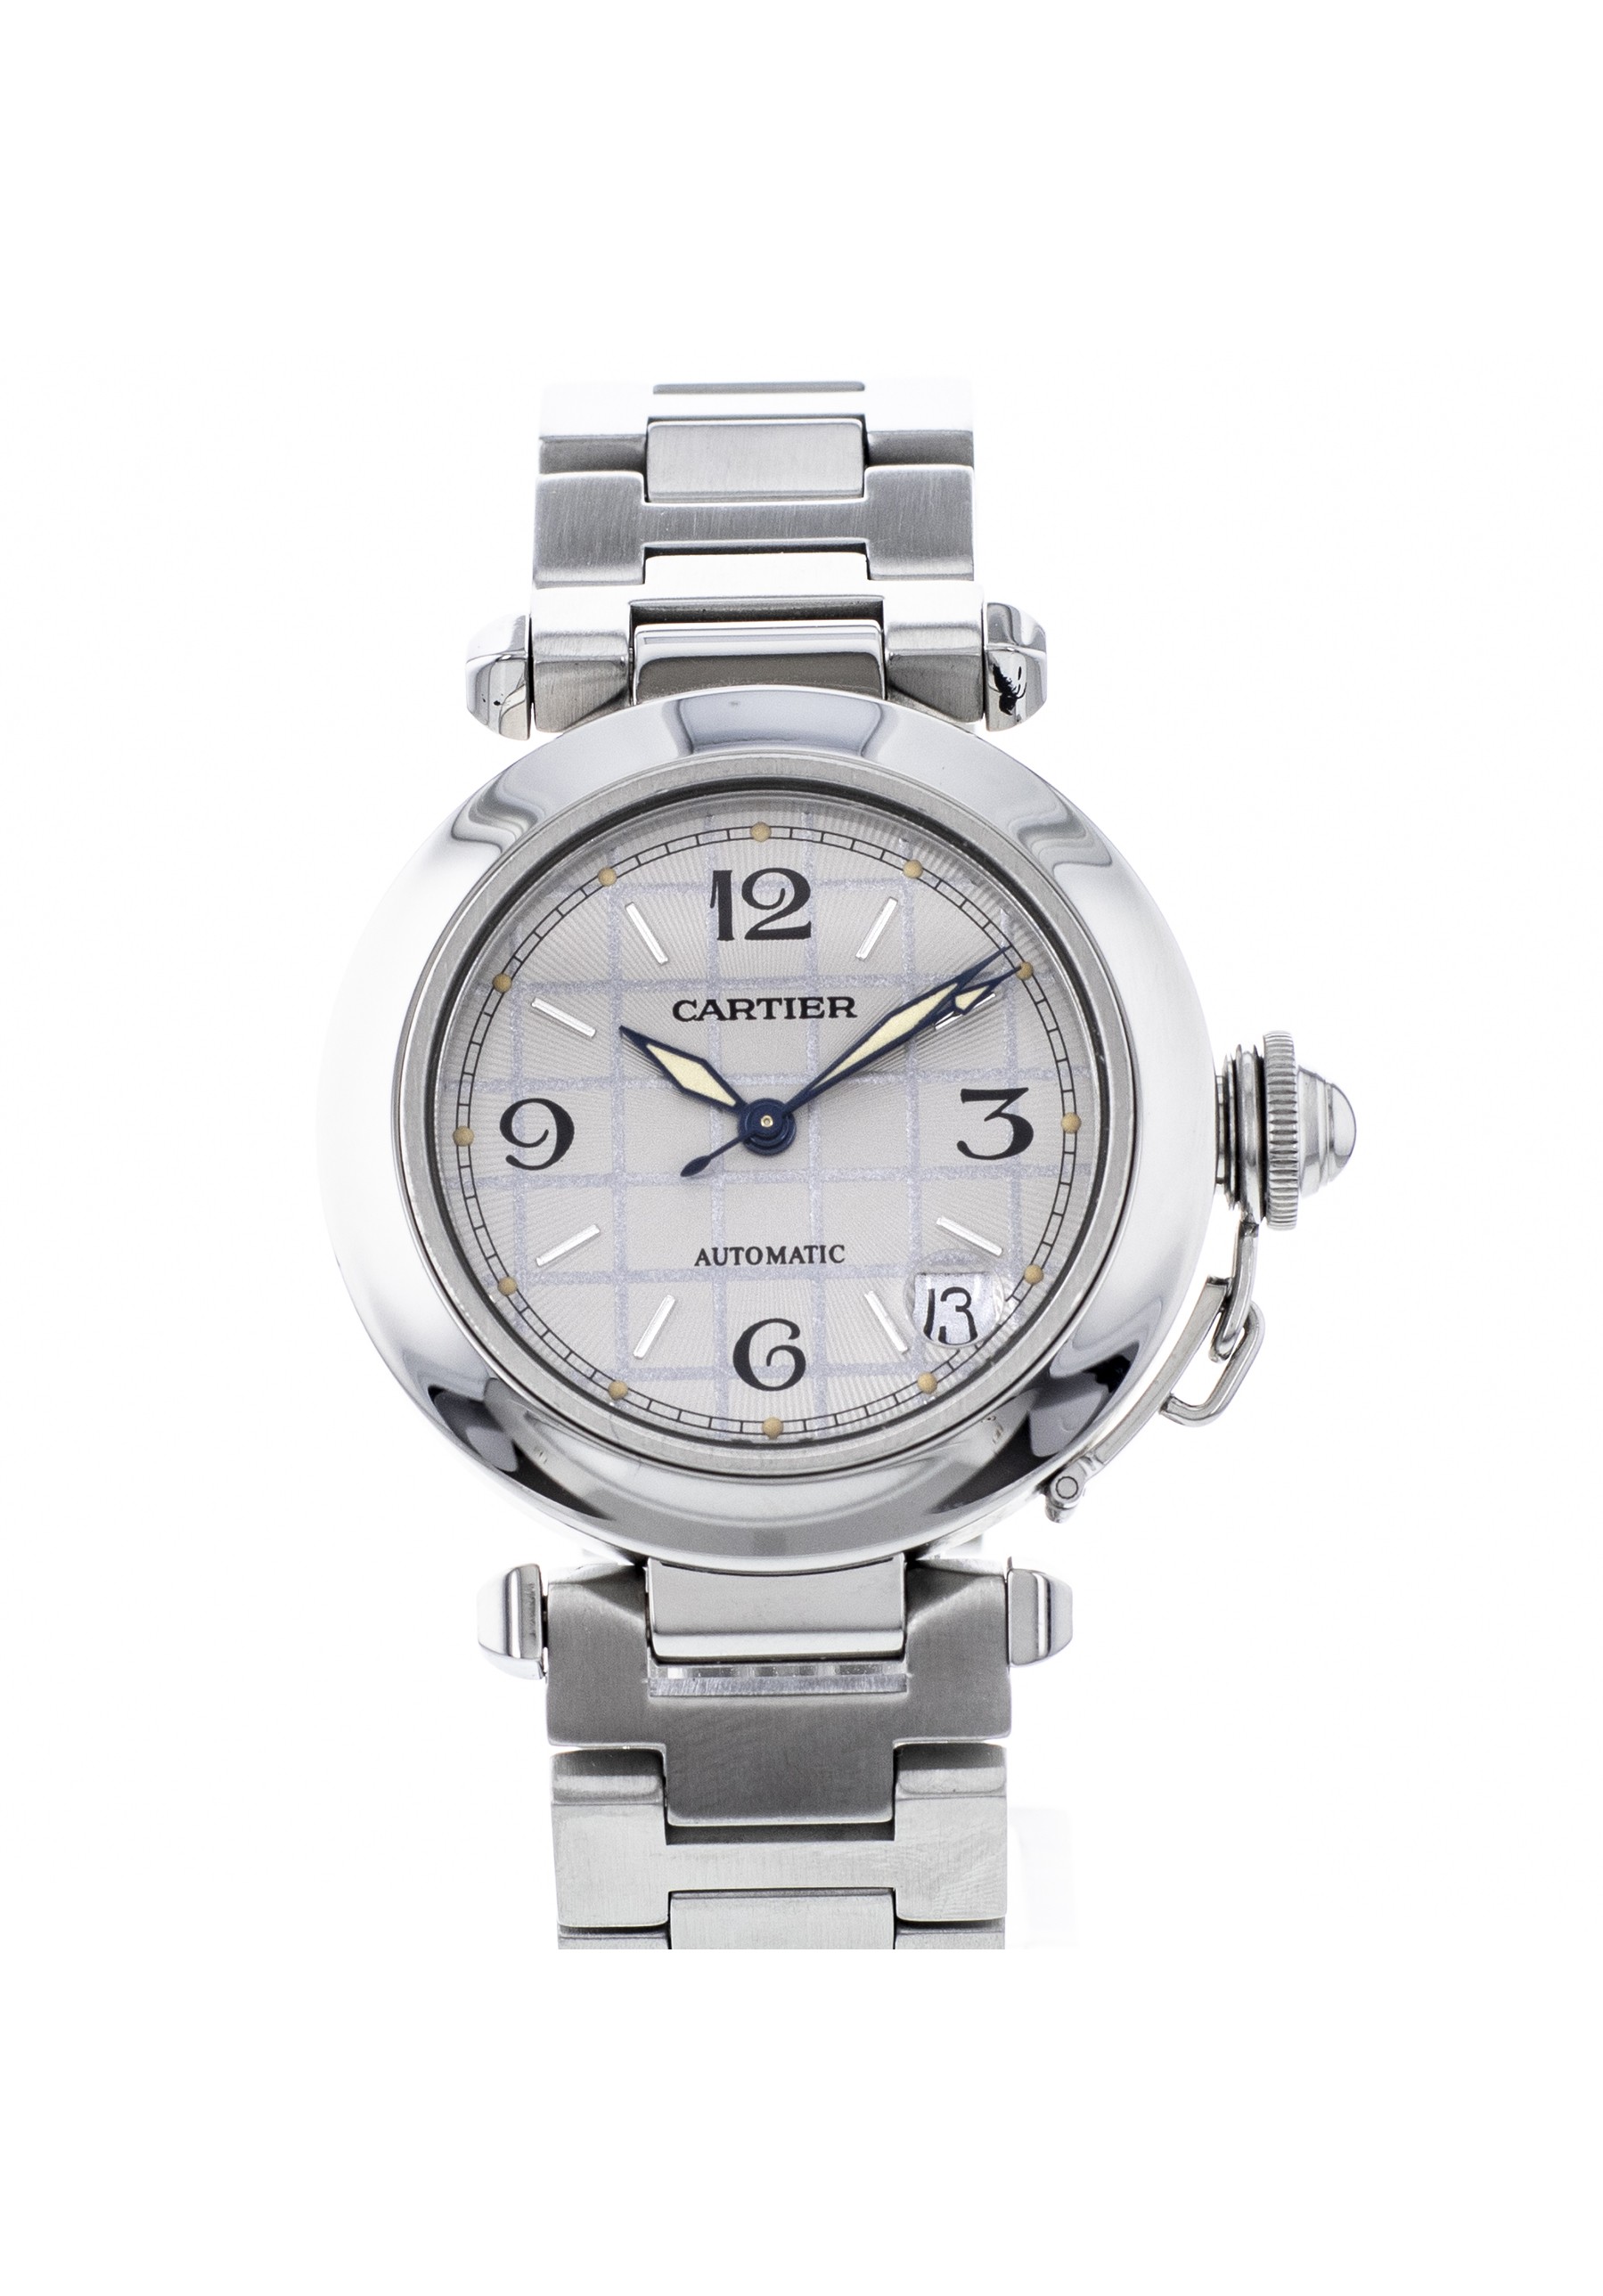 Pre-owned CARTIER Pasha watch : Ref 